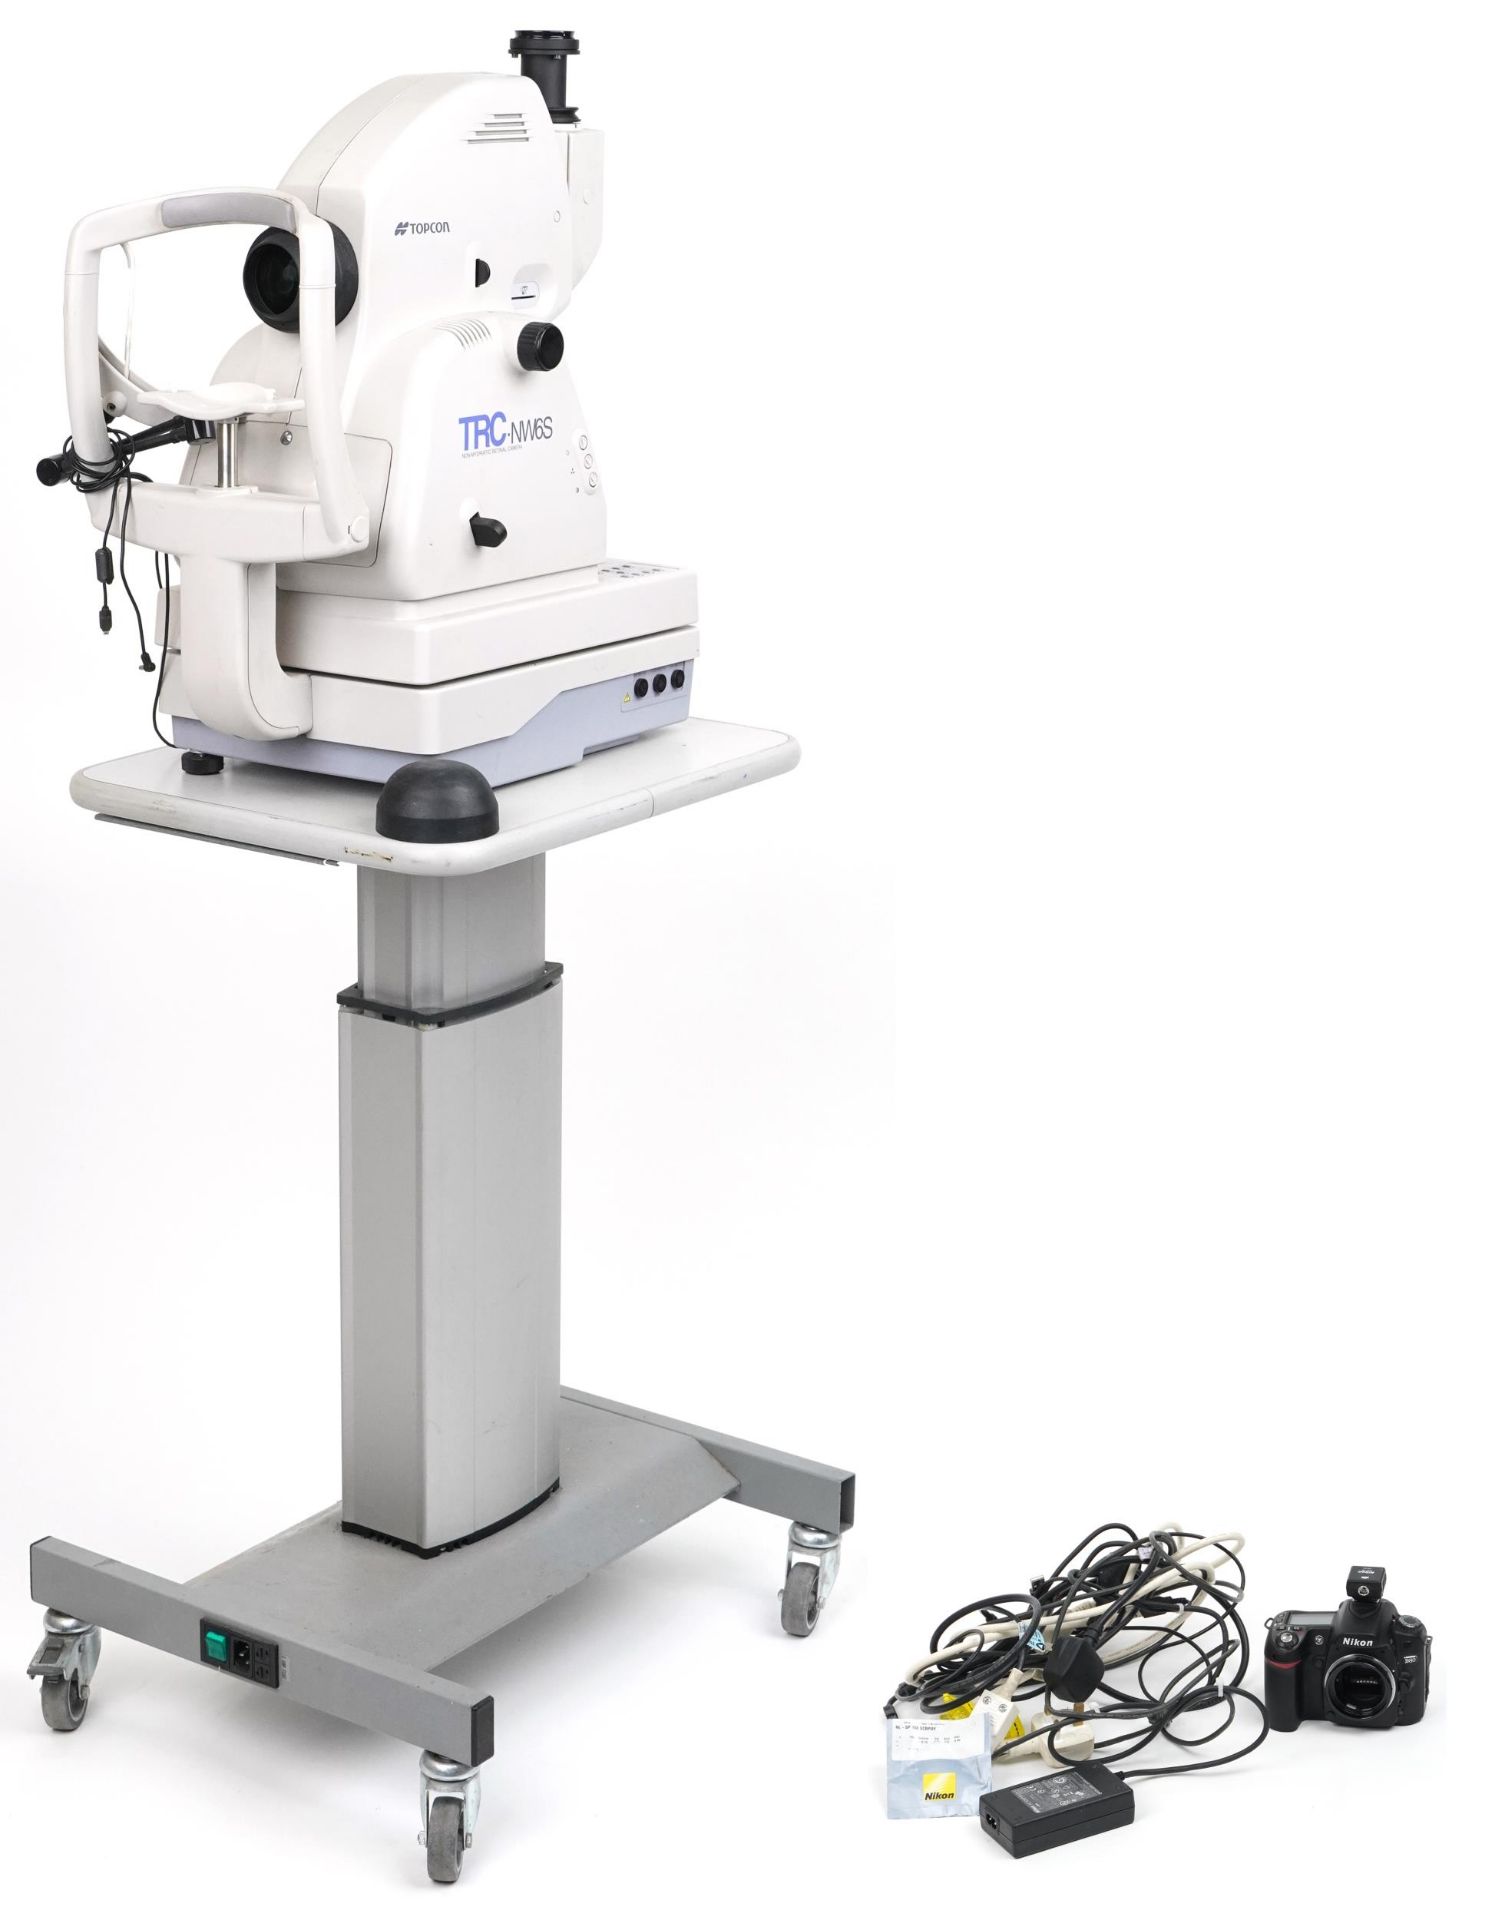 Topcon TRC NW6S Non-Mydriatic retinal camera on electric rise and fall table with Nikon D80 camera - Bild 2 aus 3